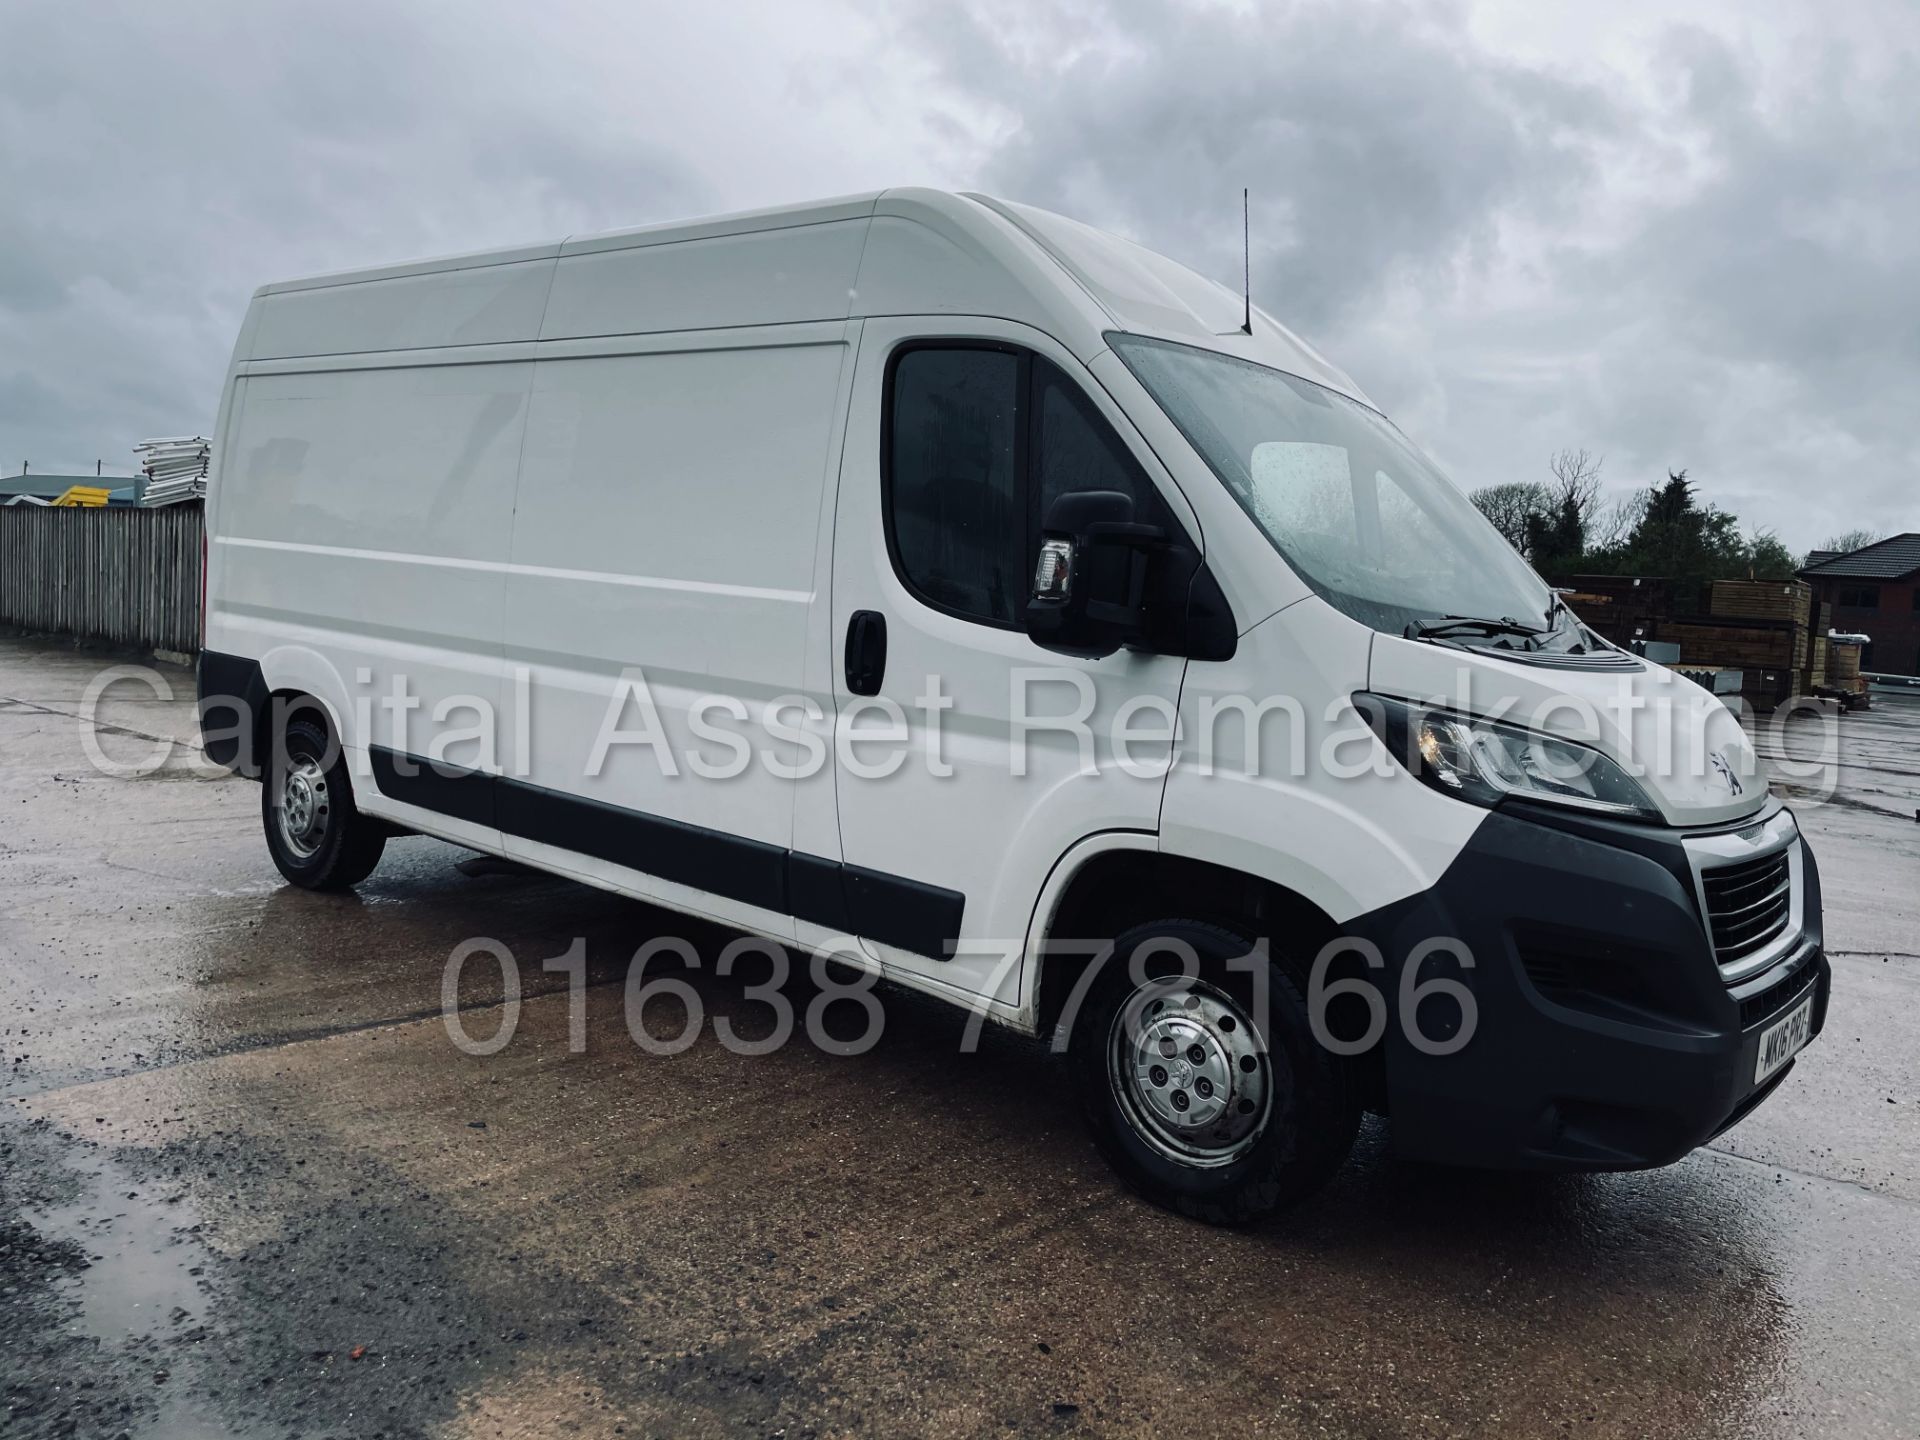 PEUGEOT BOXER 335 *PROFESSIONAL* LWB HI-ROOF (2016) '2.2 HDI - 130 BHP - 6 SPEED' *A/C* (1 OWNER) - Image 2 of 41